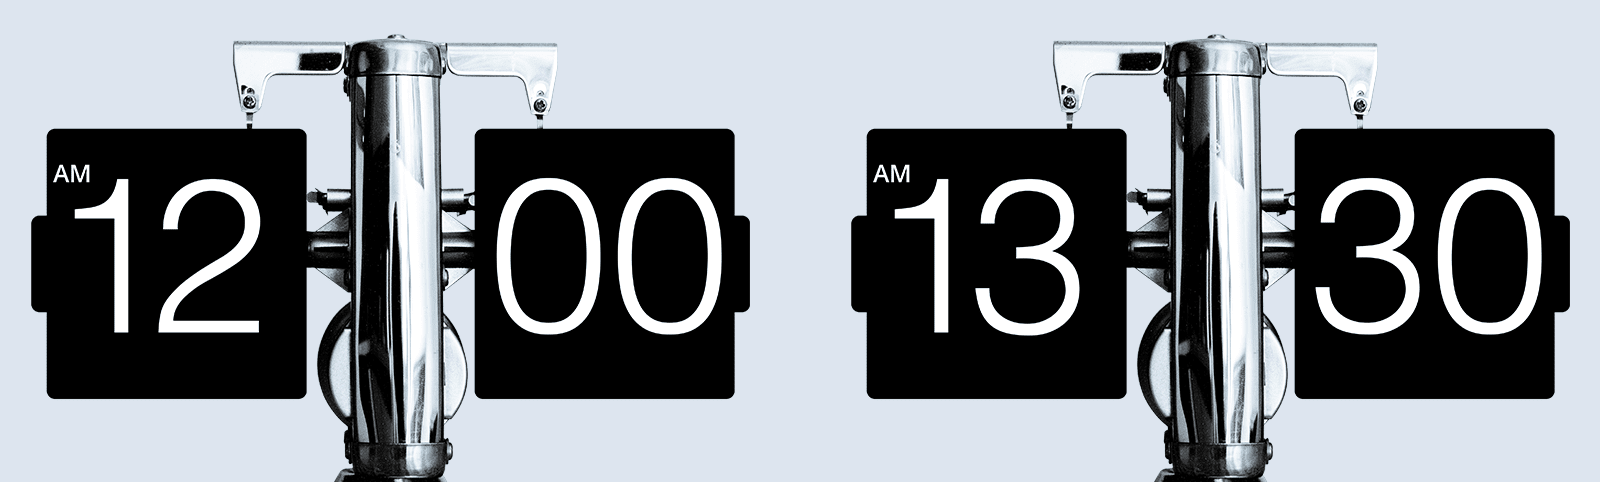 two digital clock faces showing times